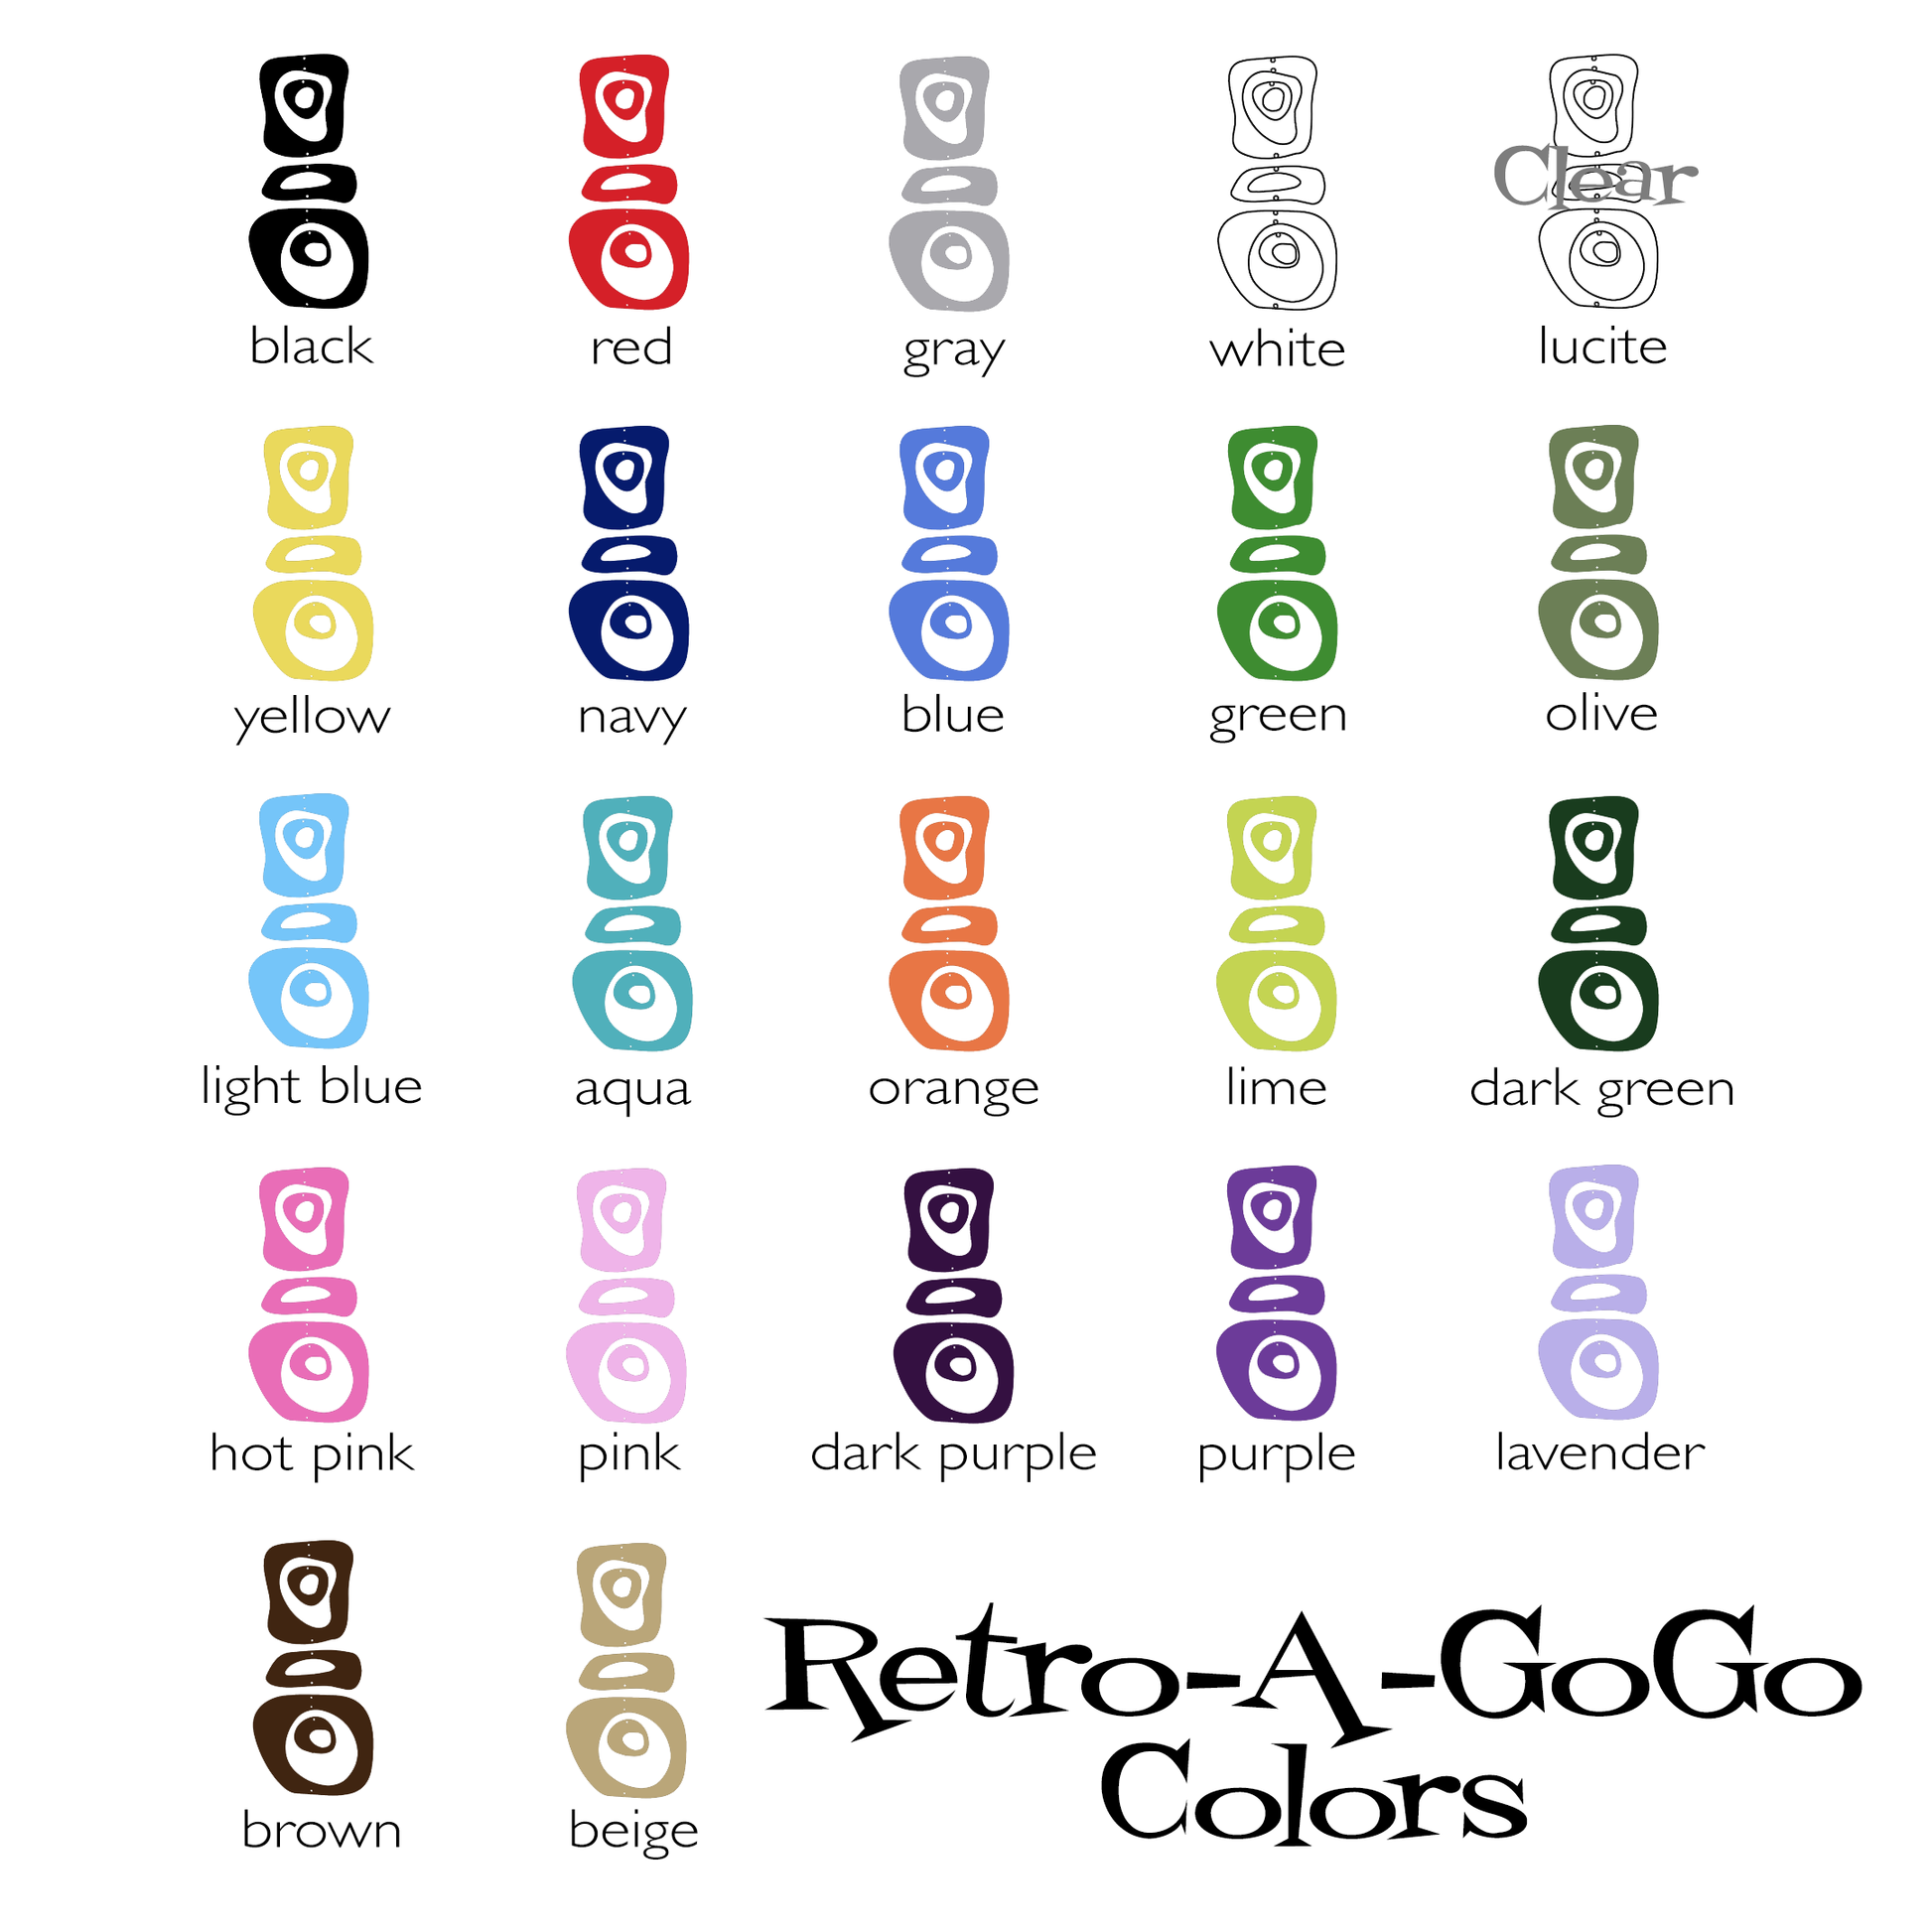 Retro-A-GoGo Atomic Kits Color Chart by AtomicMobiles.com